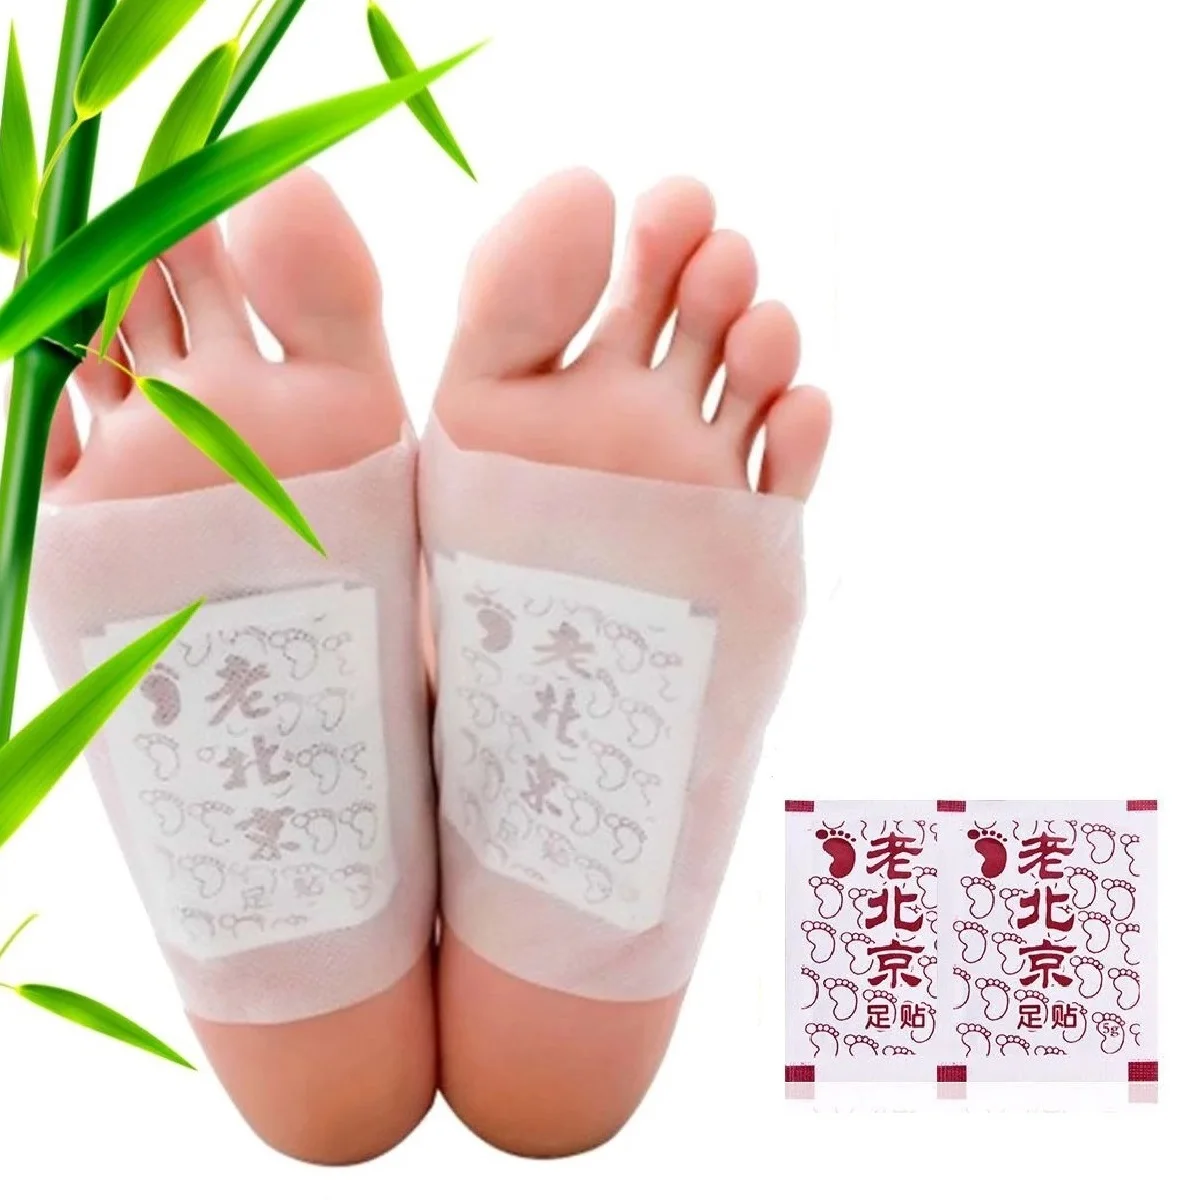 

100-300 Pcs Detox Foot Patches Stickers Bamboo Vinegar Organic Herbal Cleansing Pads Slimming Weight Loss Body Health Care